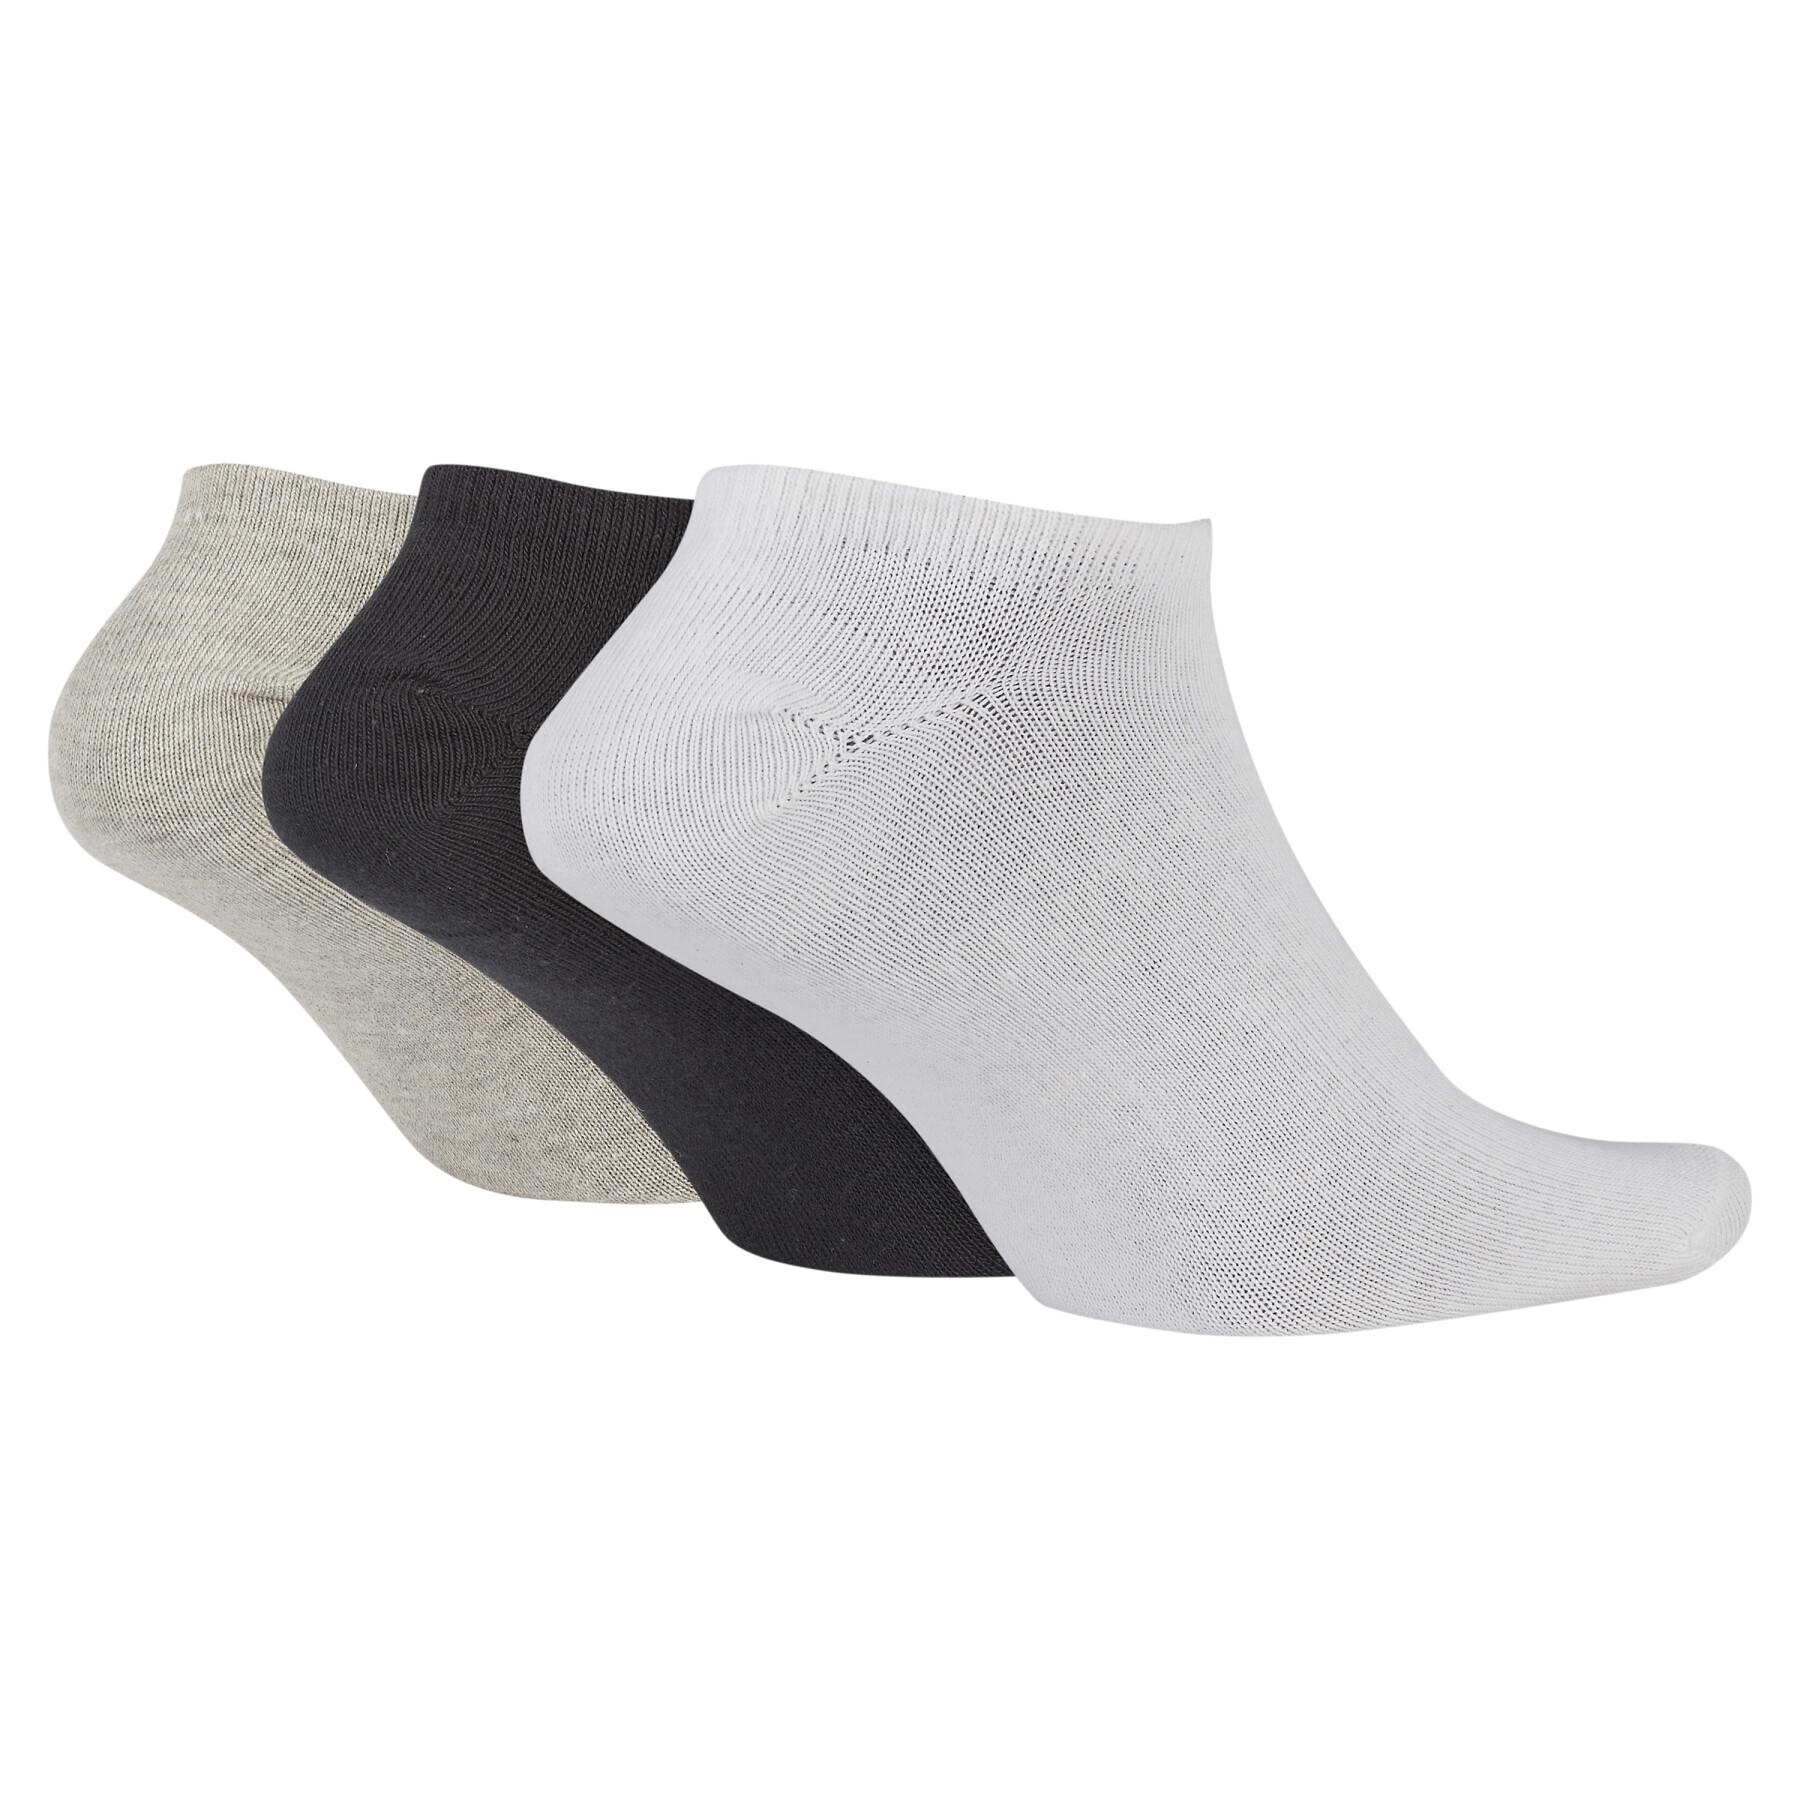 Invisible socks Nike Lightweight (x6)